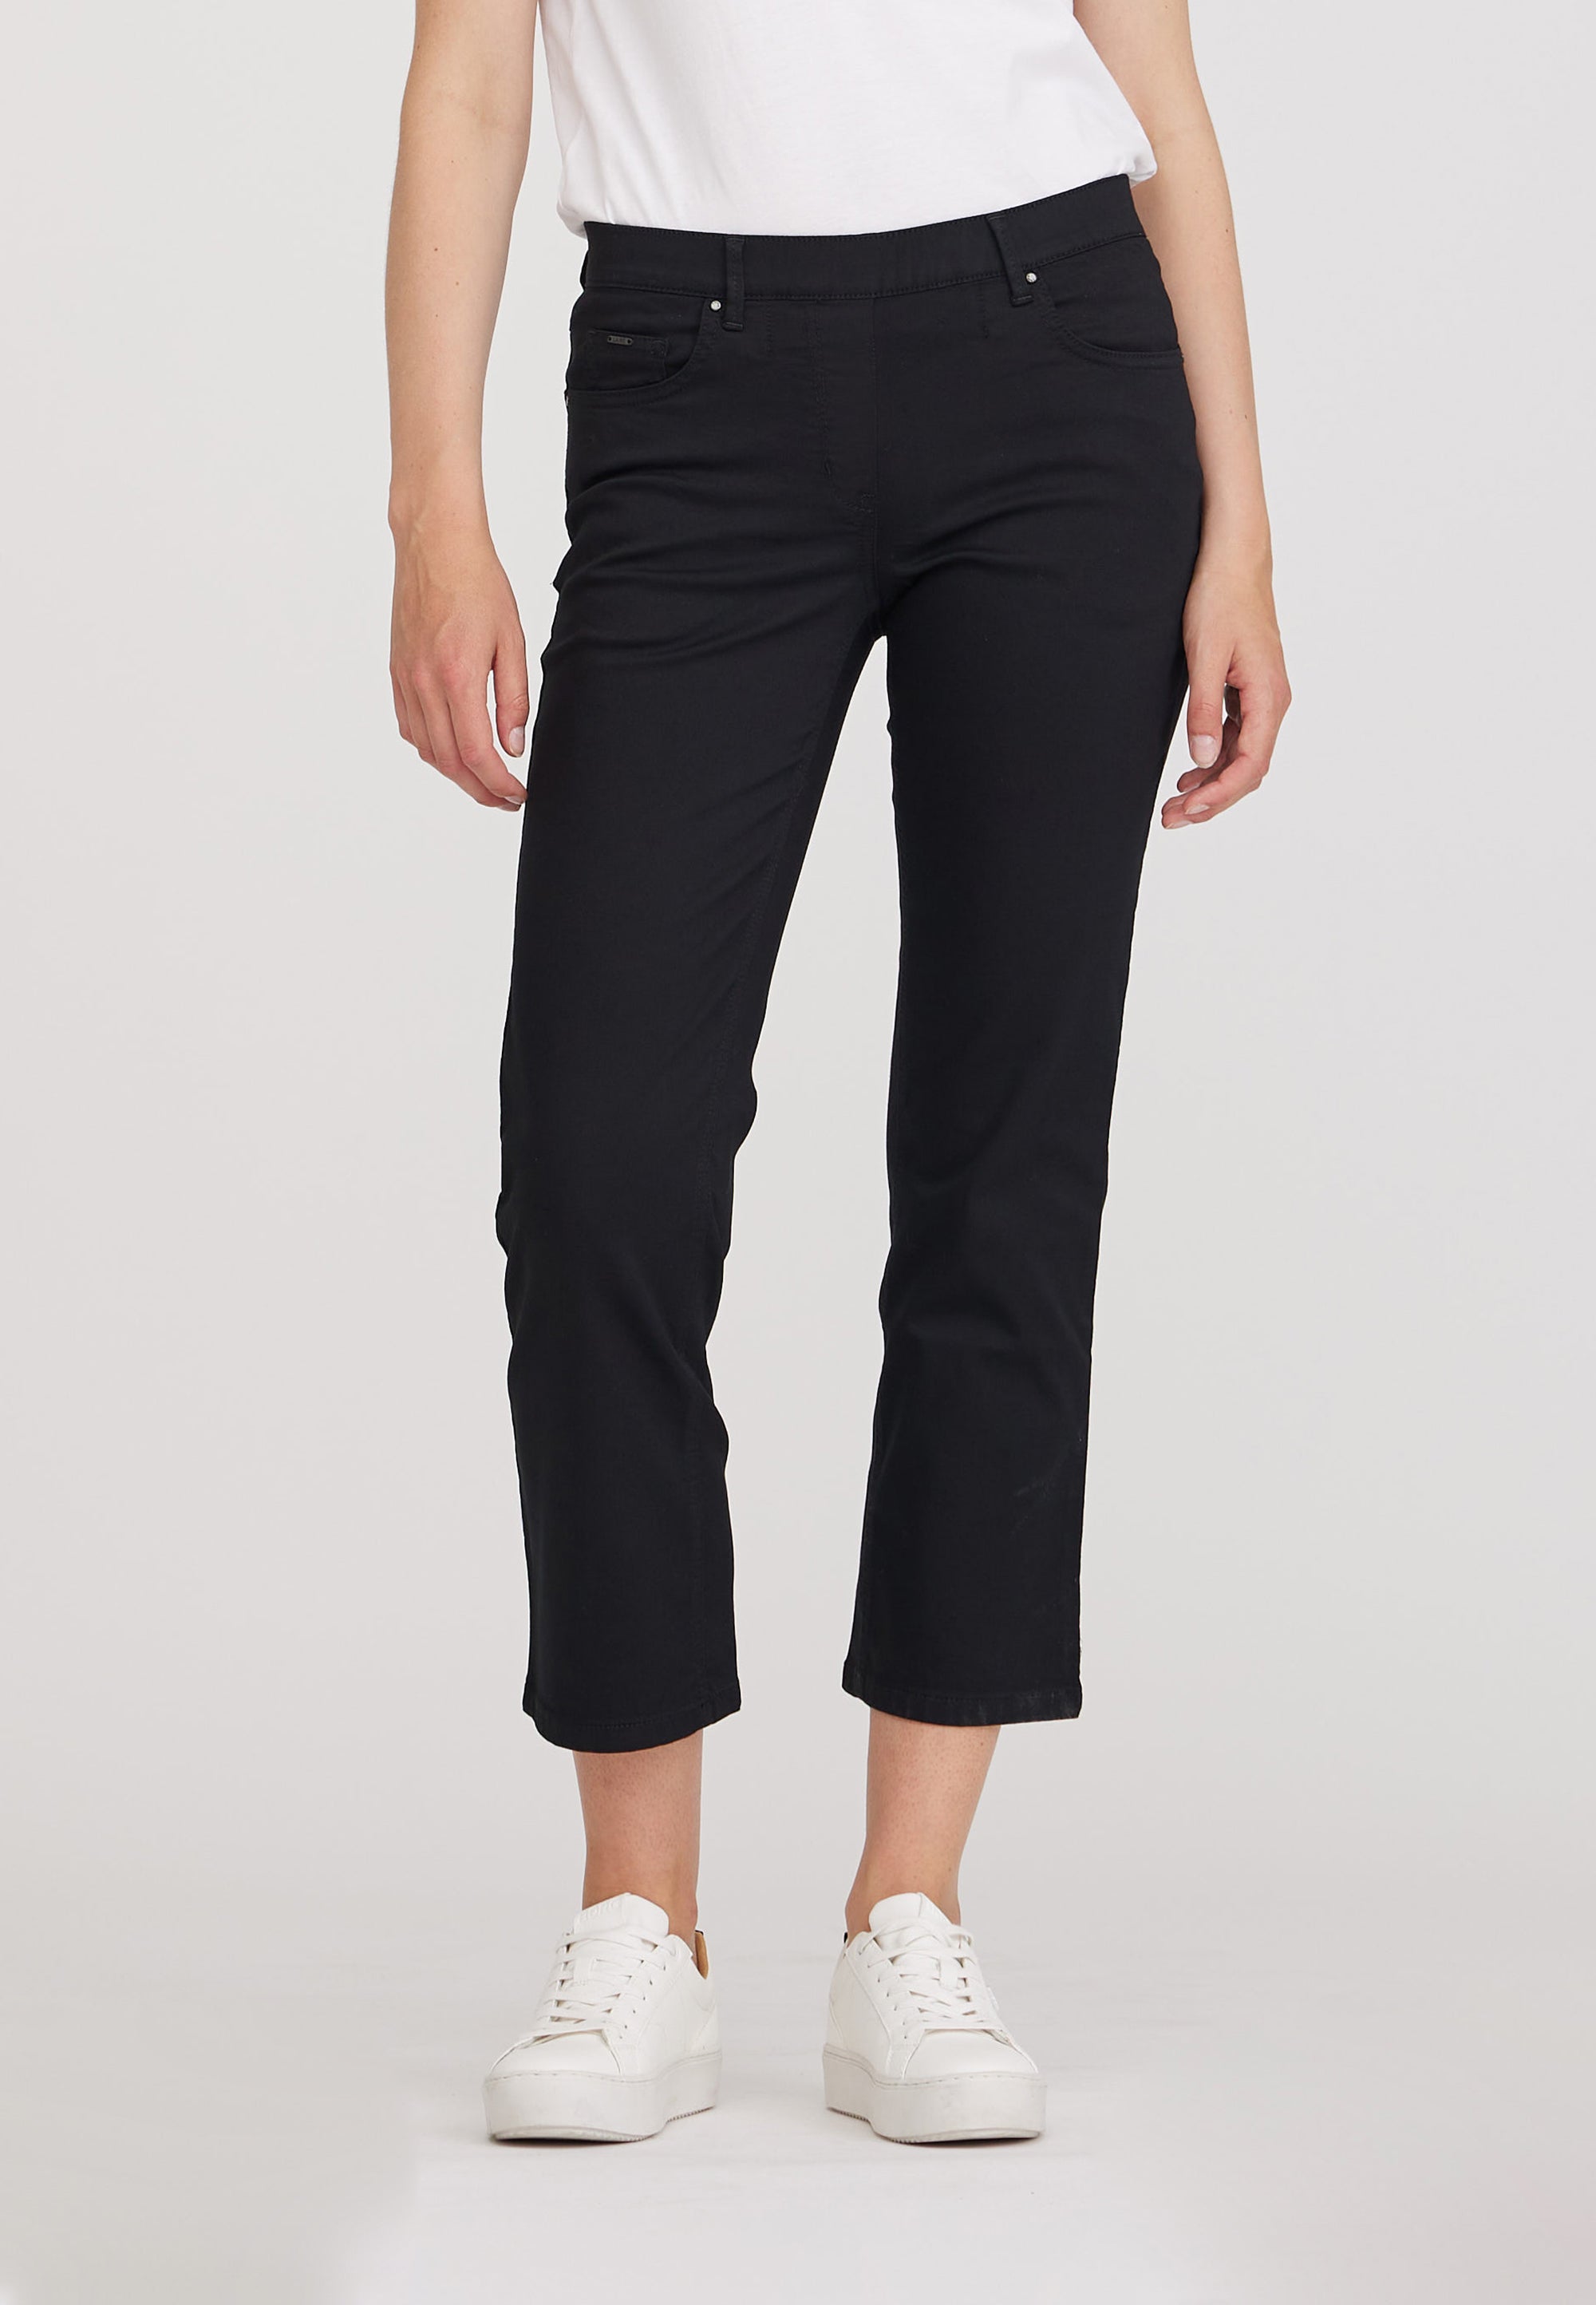 LAURIE Helen Straight - Extra Short Length Trousers STRAIGHT 99000 Black